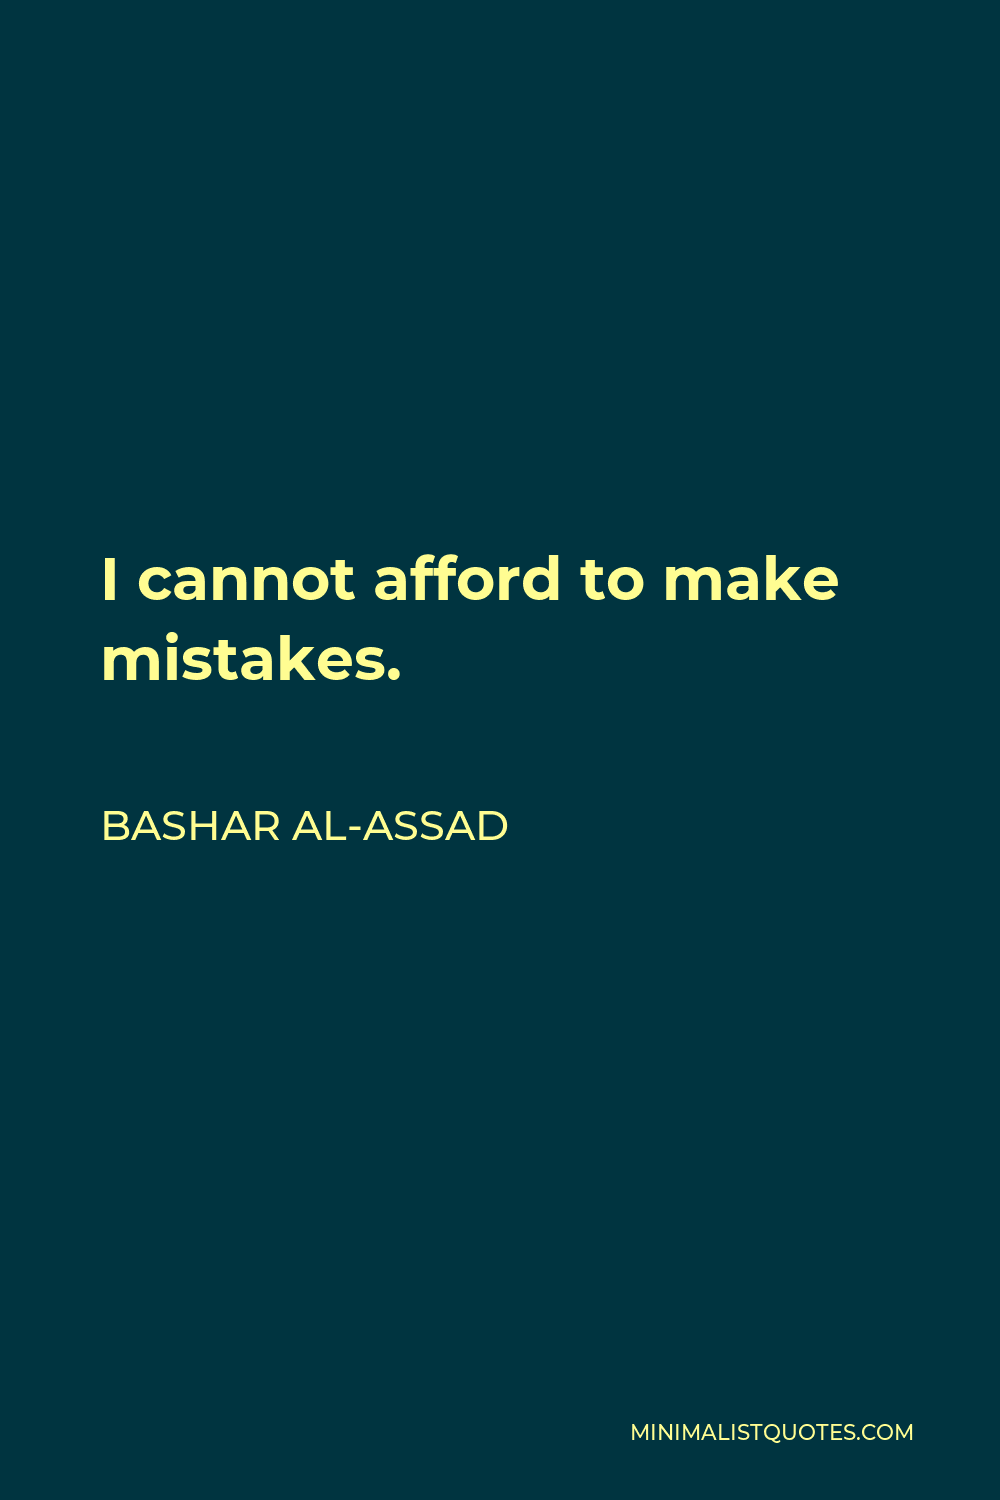 Bashar al-Assad Quote - I cannot afford to make mistakes.